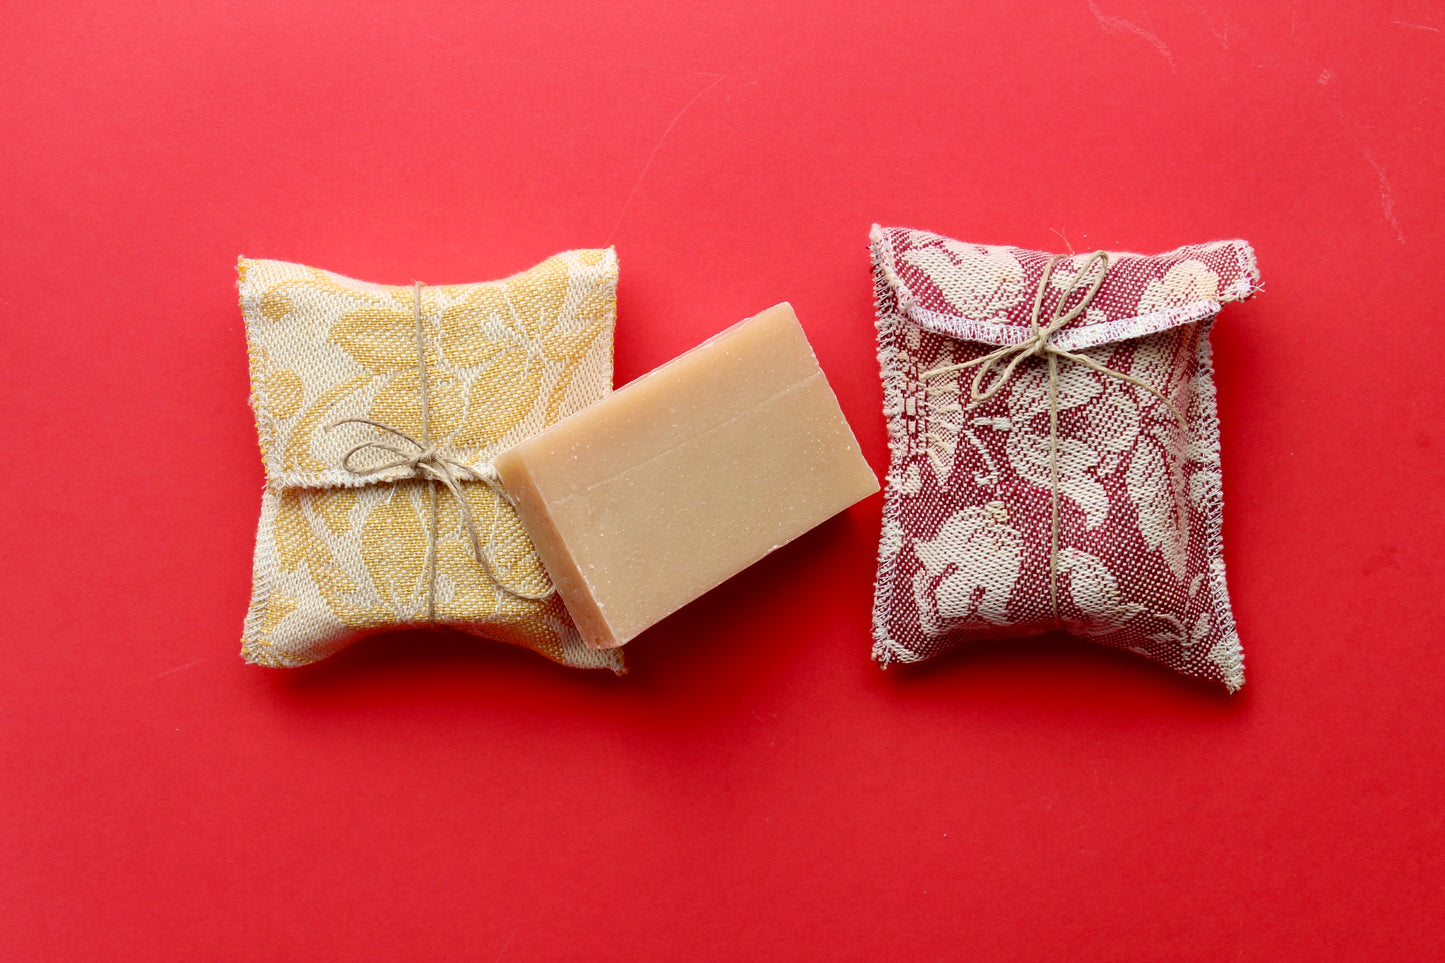 Artisan jasmine soap with red clay